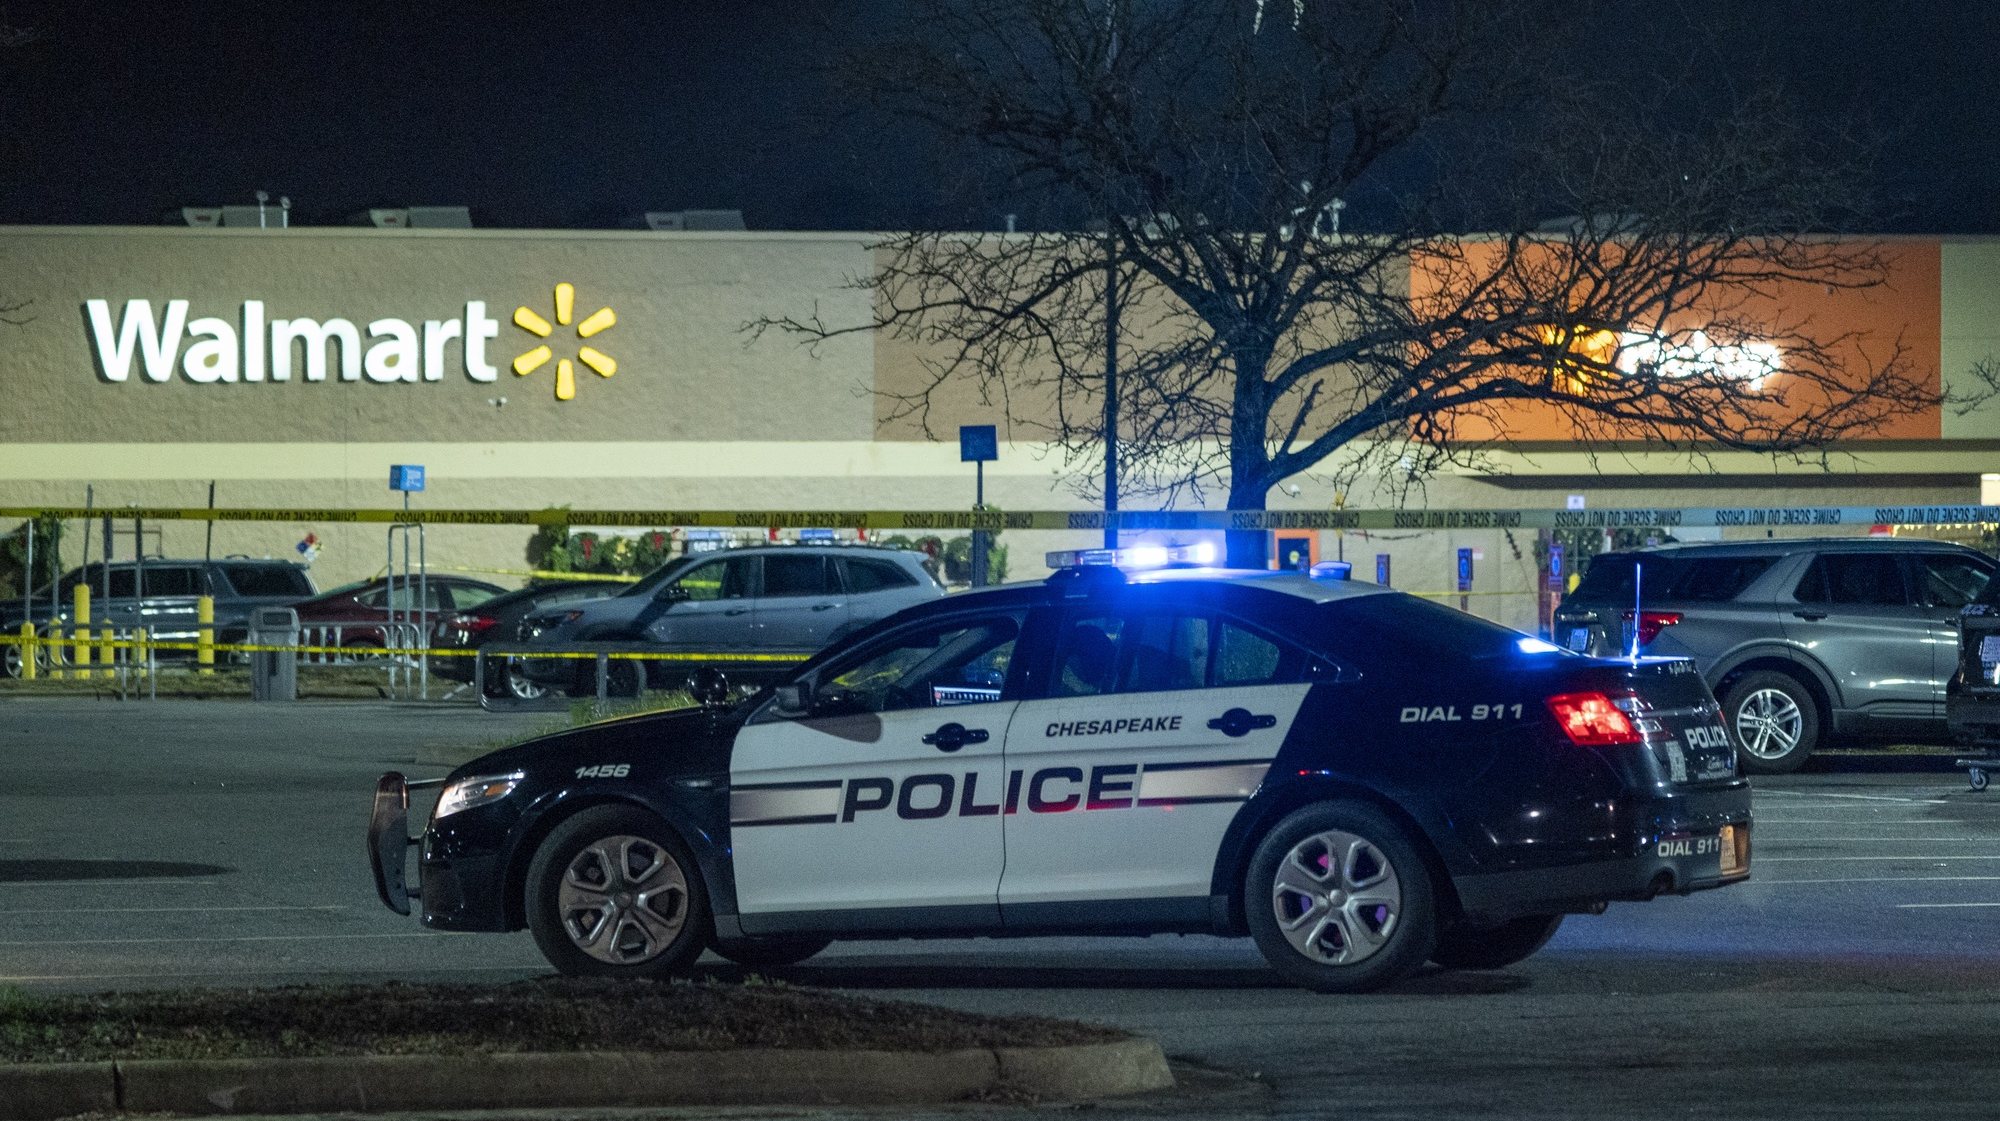 epa10322072 Police officers work at the scene of a mass shooting at the Walmart Supercenter in Chesapeake, Virginia, USA, 23 November 2022. Leo Kosinski of the Chesapeake Police Department said officers responded to a report of a shooting at around 10:15 pm 22 November 2022. At least seven people including the shooter died in the shooting, police said.  EPA/SHAWN THEW